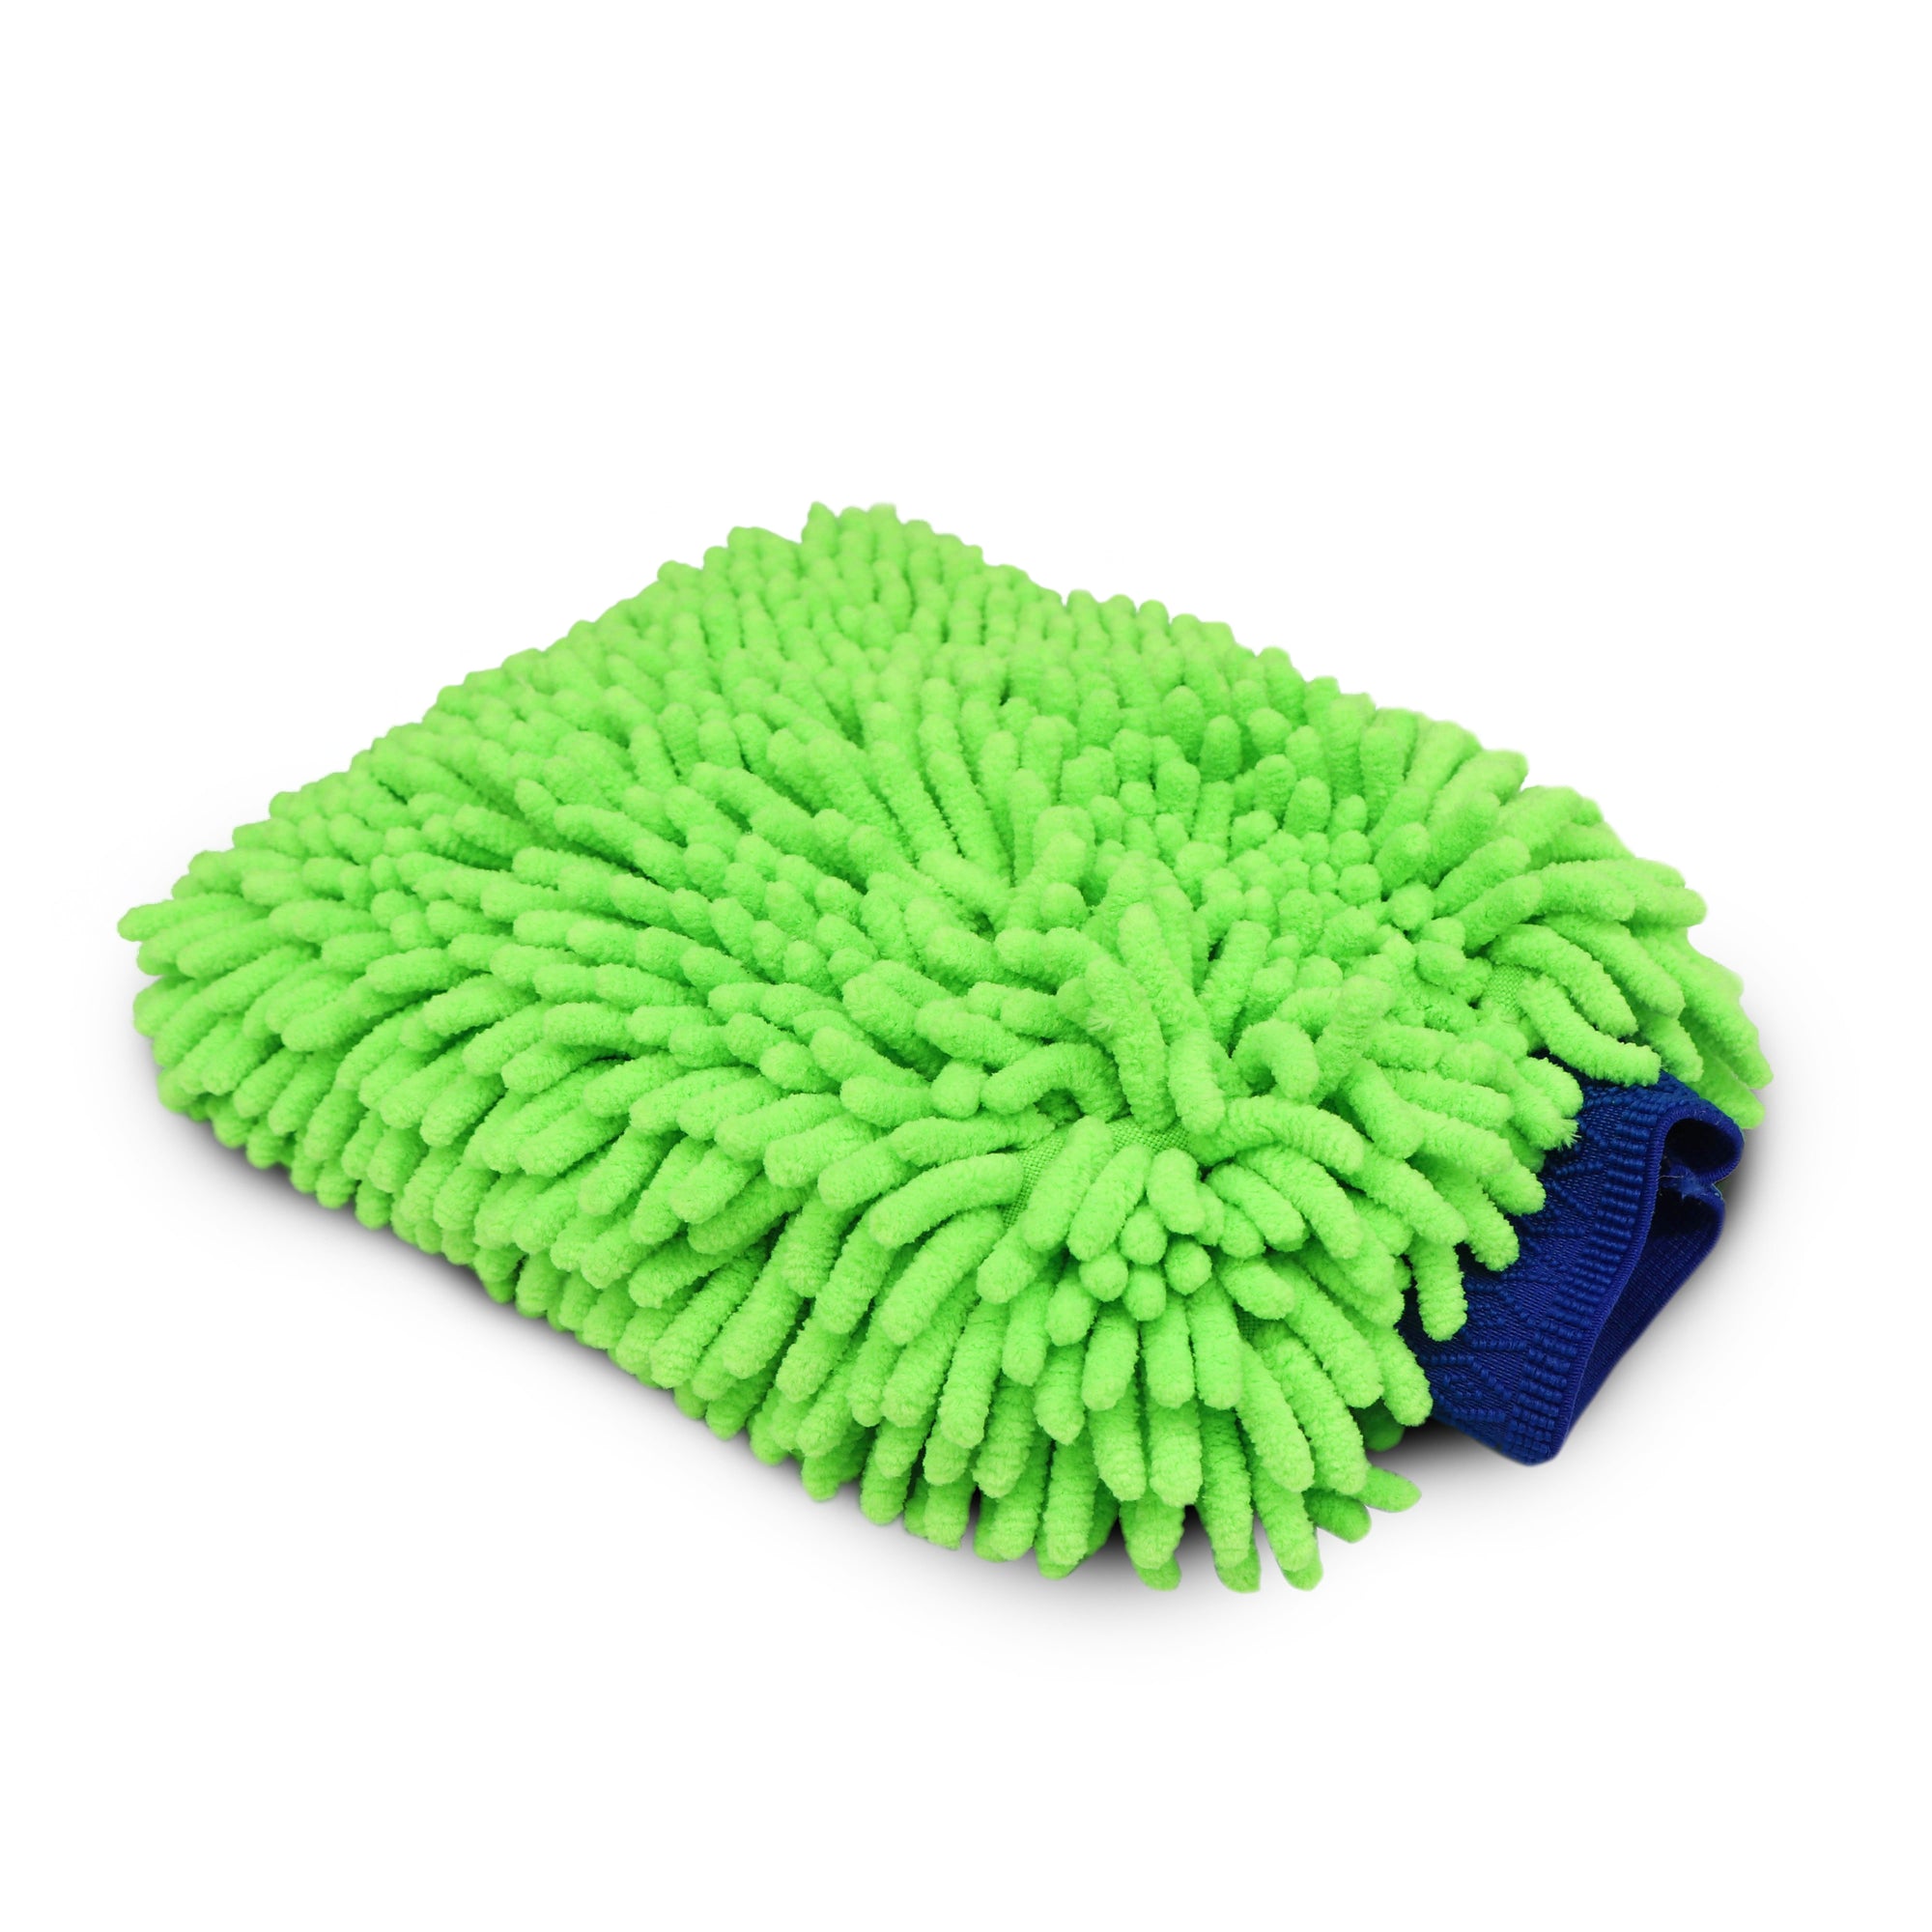 Renegade Products USA Chenille Microfiber Wash Mitt, displayed against a clean background. This plush and soft wash mitt is made of high-quality chenille microfiber, designed to gently cleanse and polish surfaces without scratching. Ideal for washing vehicles, it ensures a smooth and shiny finish, providing a touch of luxury to the car care routine.